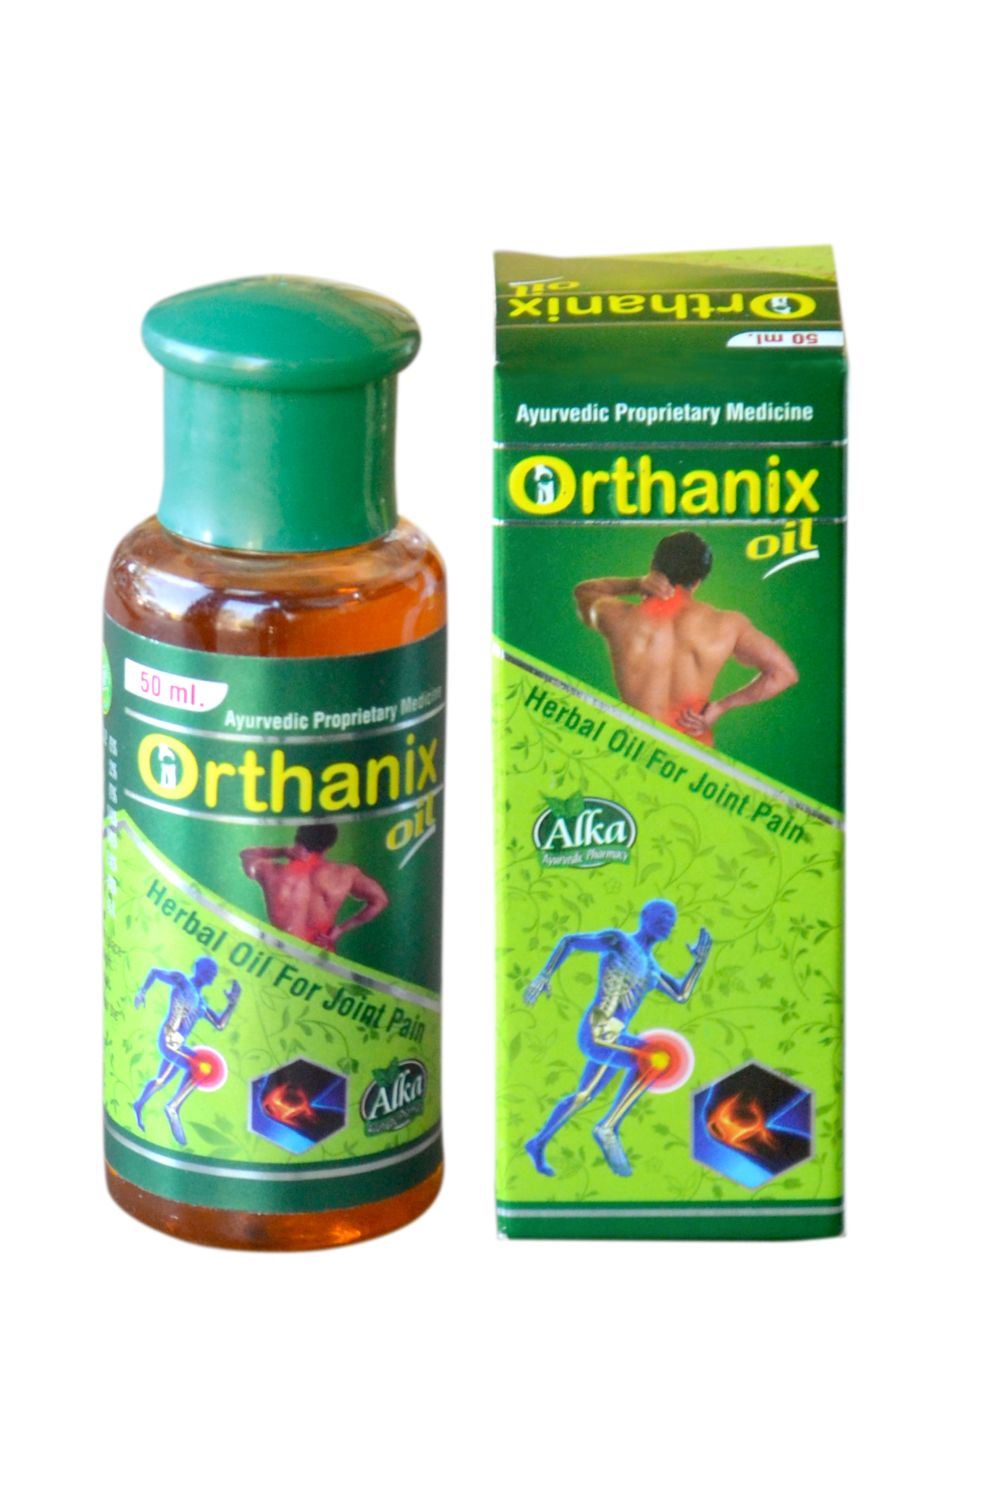 Orthanix Oil  For joint Pain